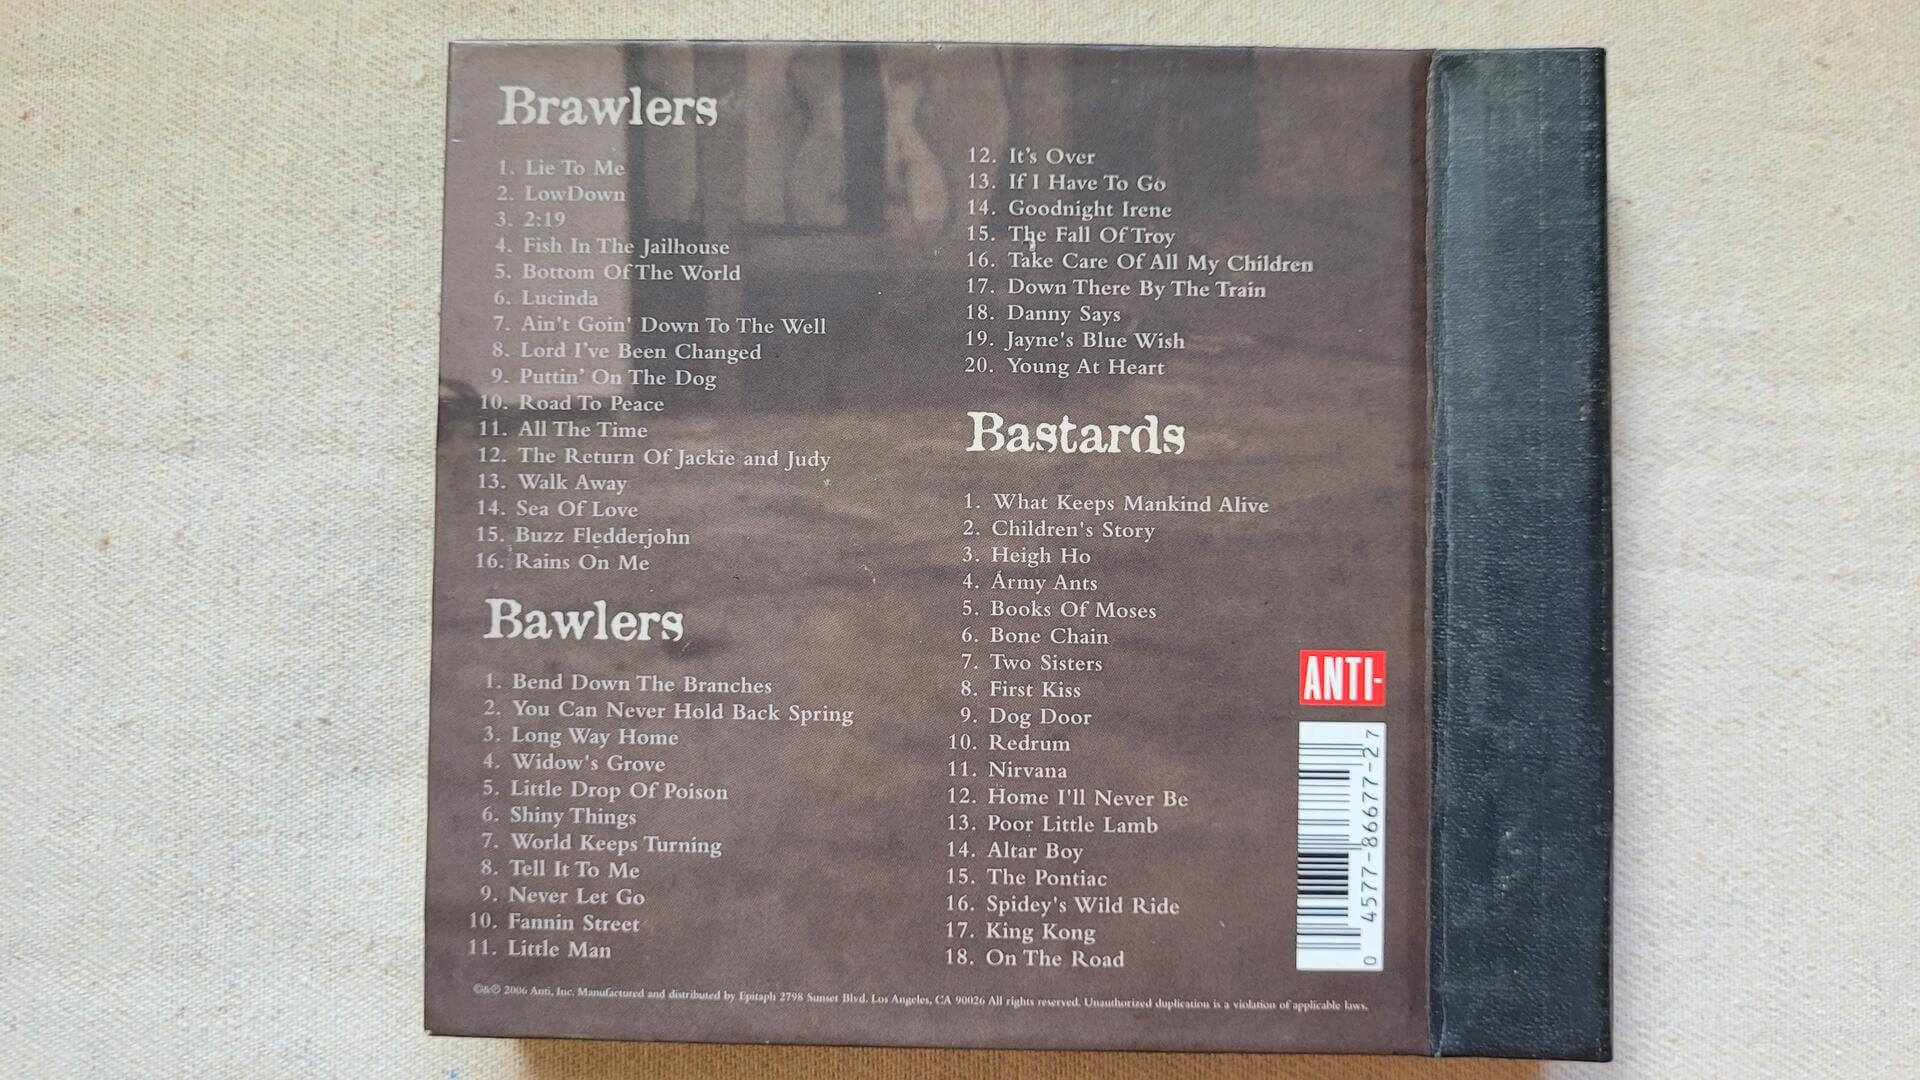 Tom Waits Orphans: Brawlers, Bawlers & Bastards 3 CDs box set with 94 page booklet. Collectible limited edition three CD set by Tom Waits, released by the ANTI- label in 2006